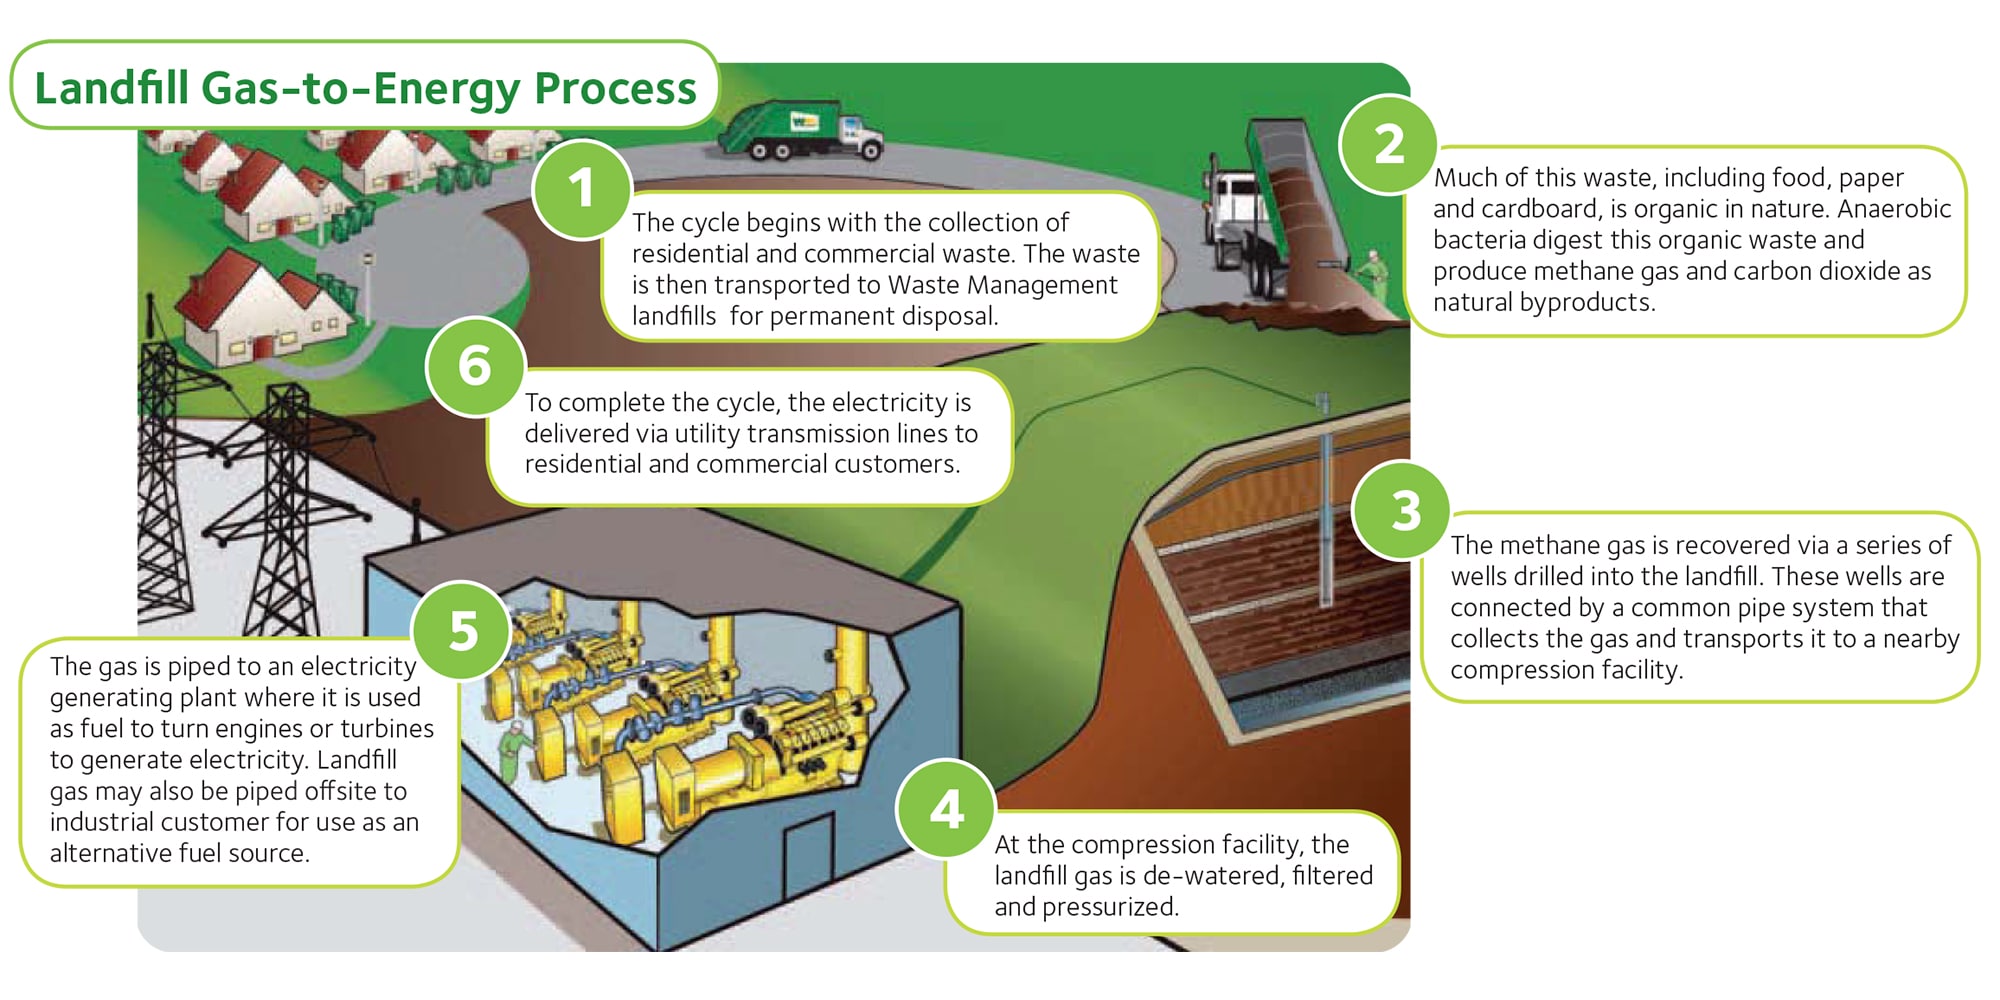 info graphic about turning methane gas in a landfill into energy